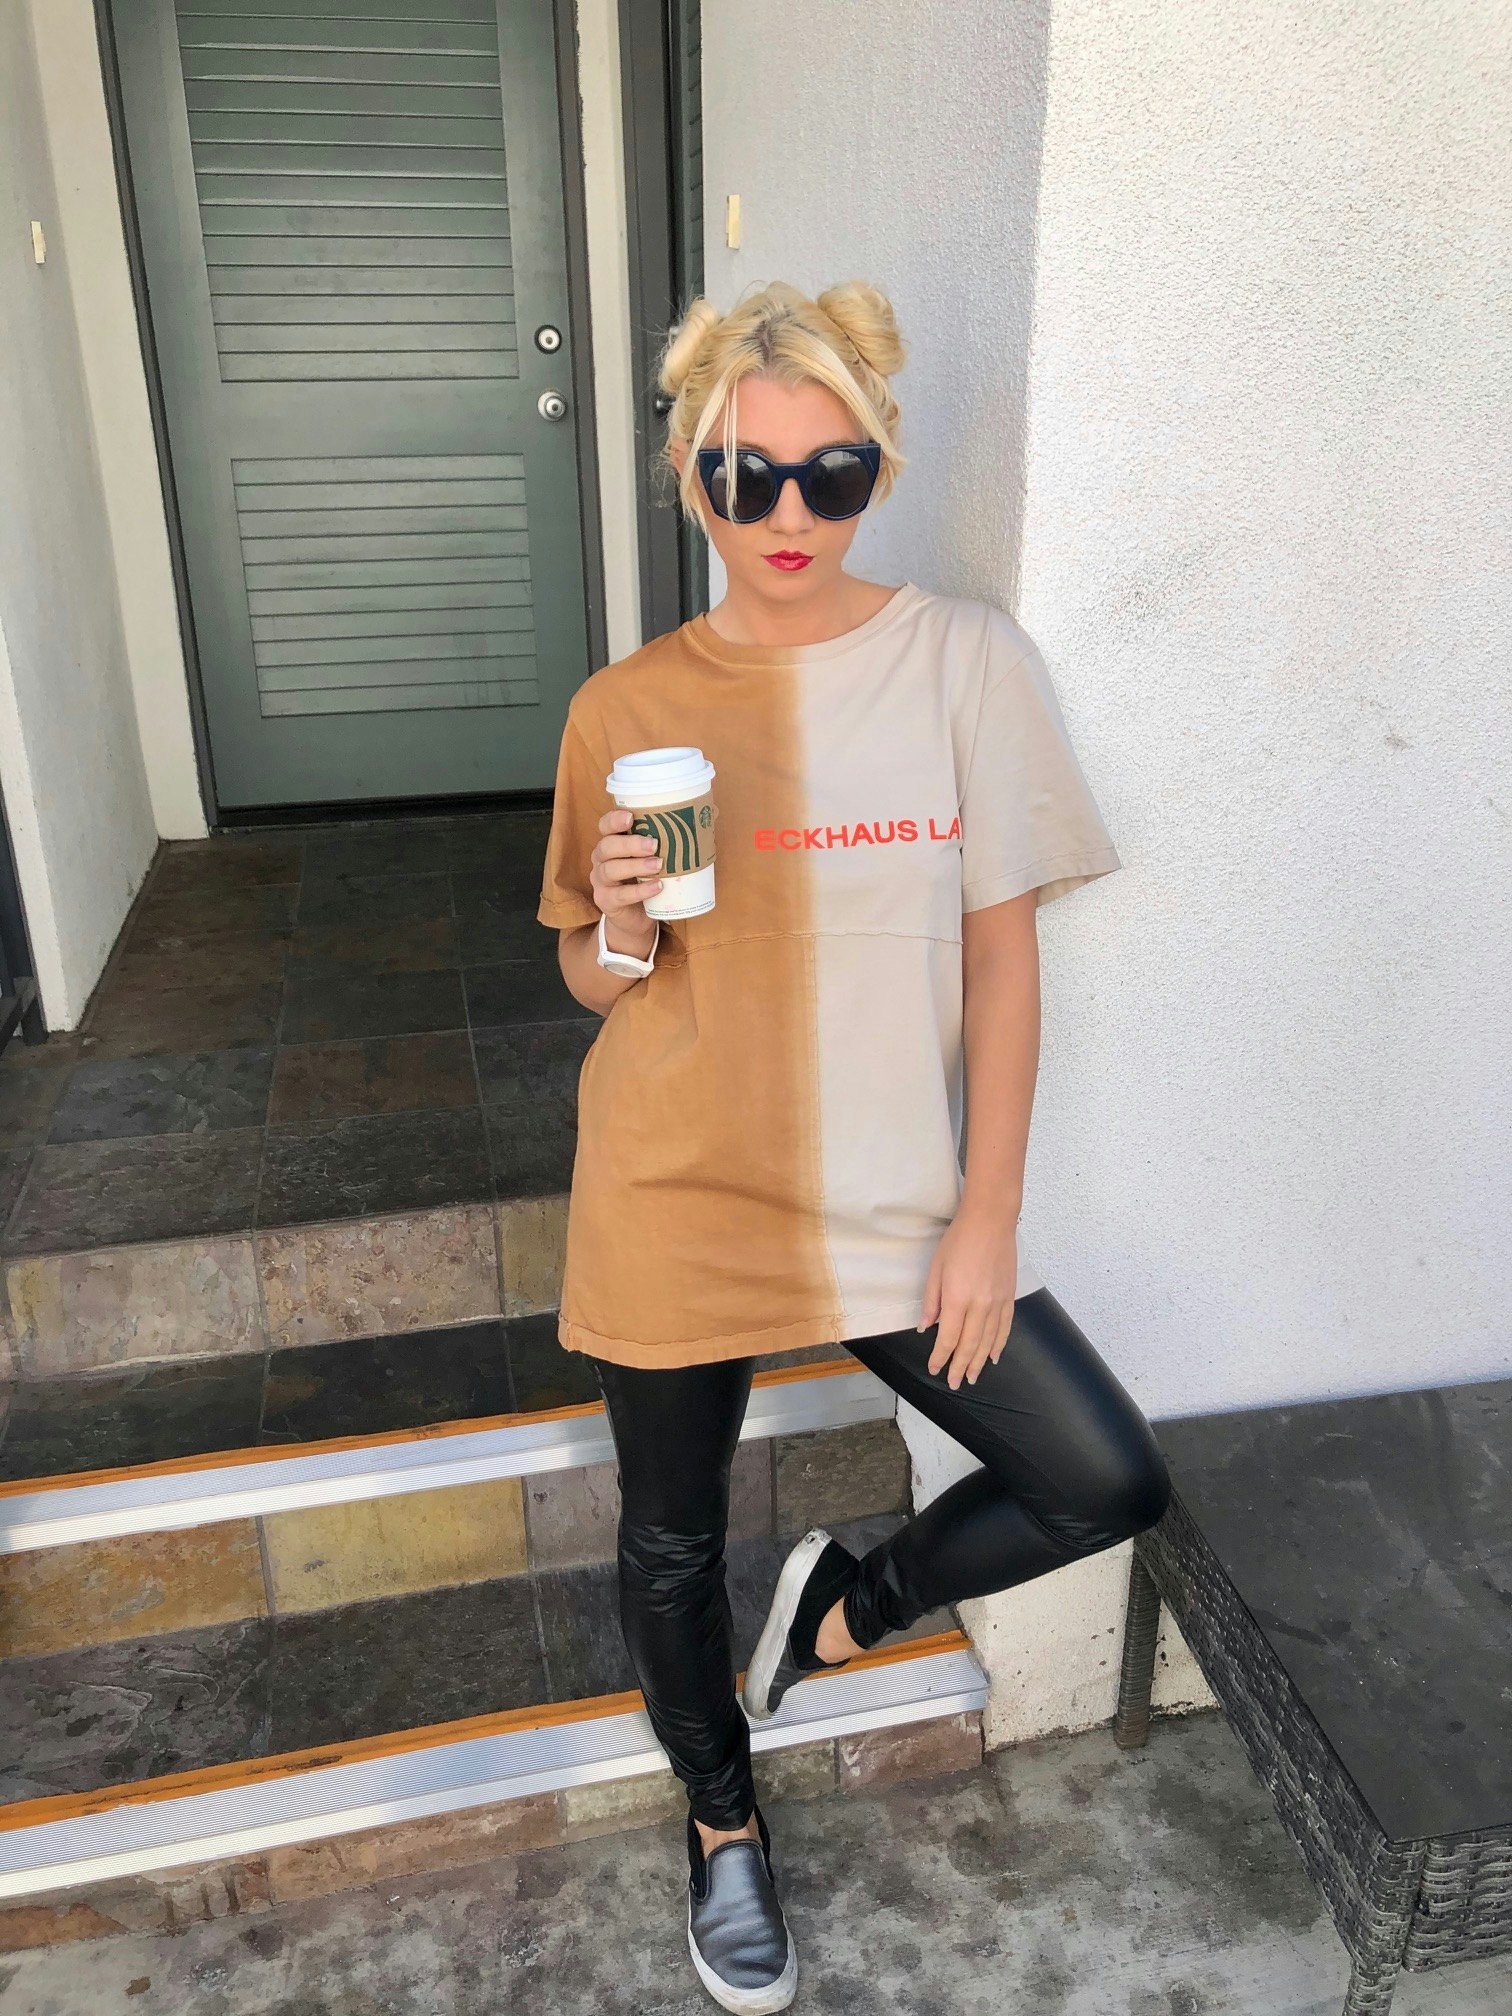 Kylie Jenner Goes Grunge with Stormi Webster in Torn Leather Pants   Footwear News